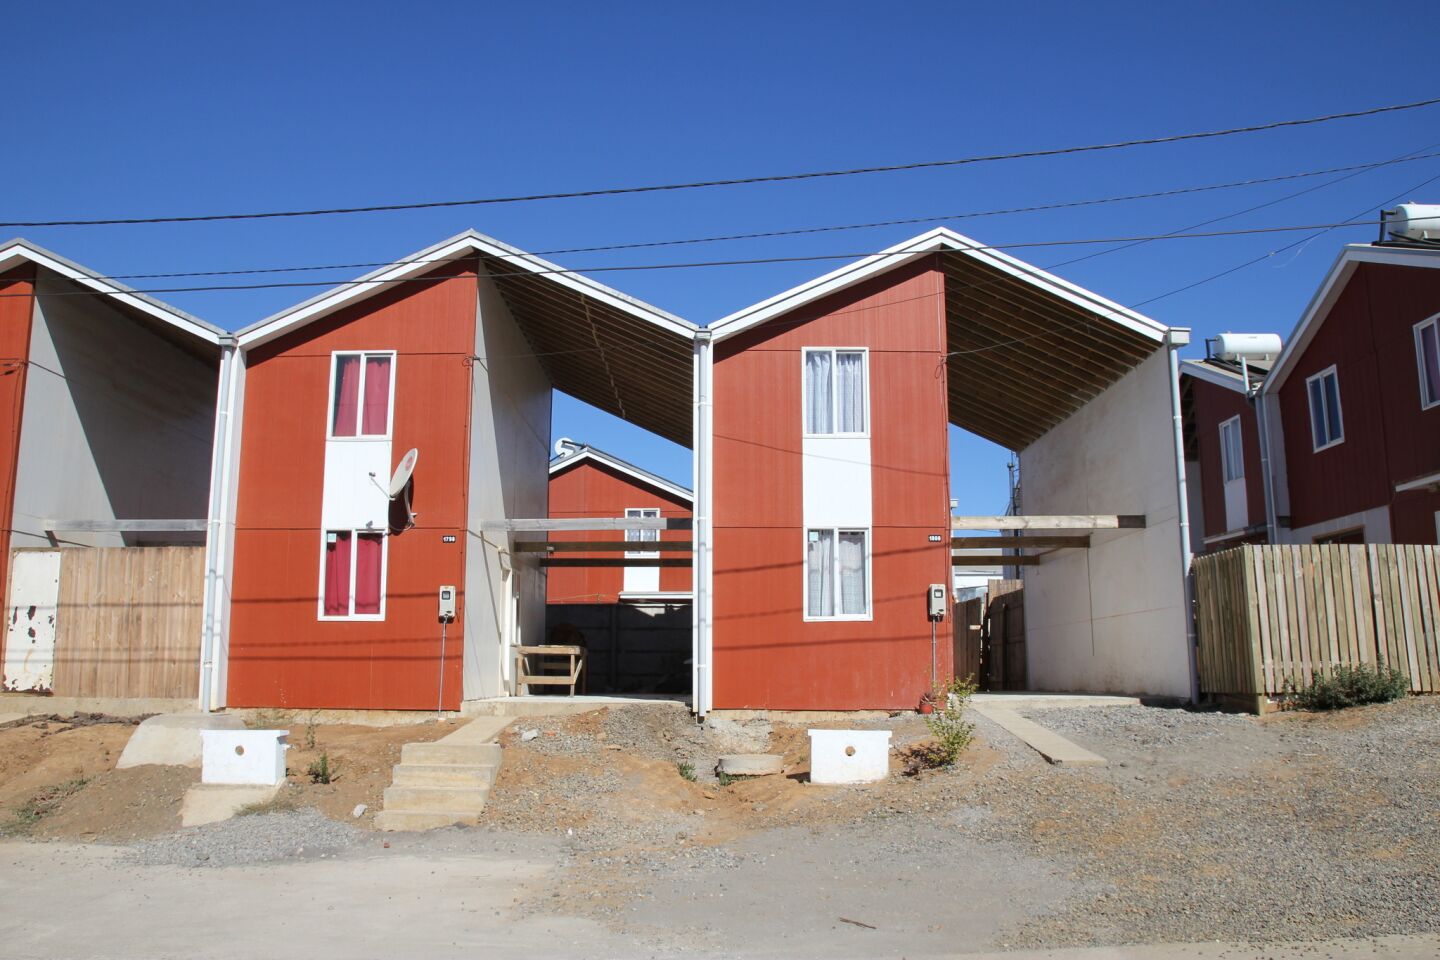 Part of the rebuilding plan involved creating more worker housing. Elemental built some of its signature social housing units: inexpensive half houses that allow the buyer to finish the construction in their own way and on their own schedule.